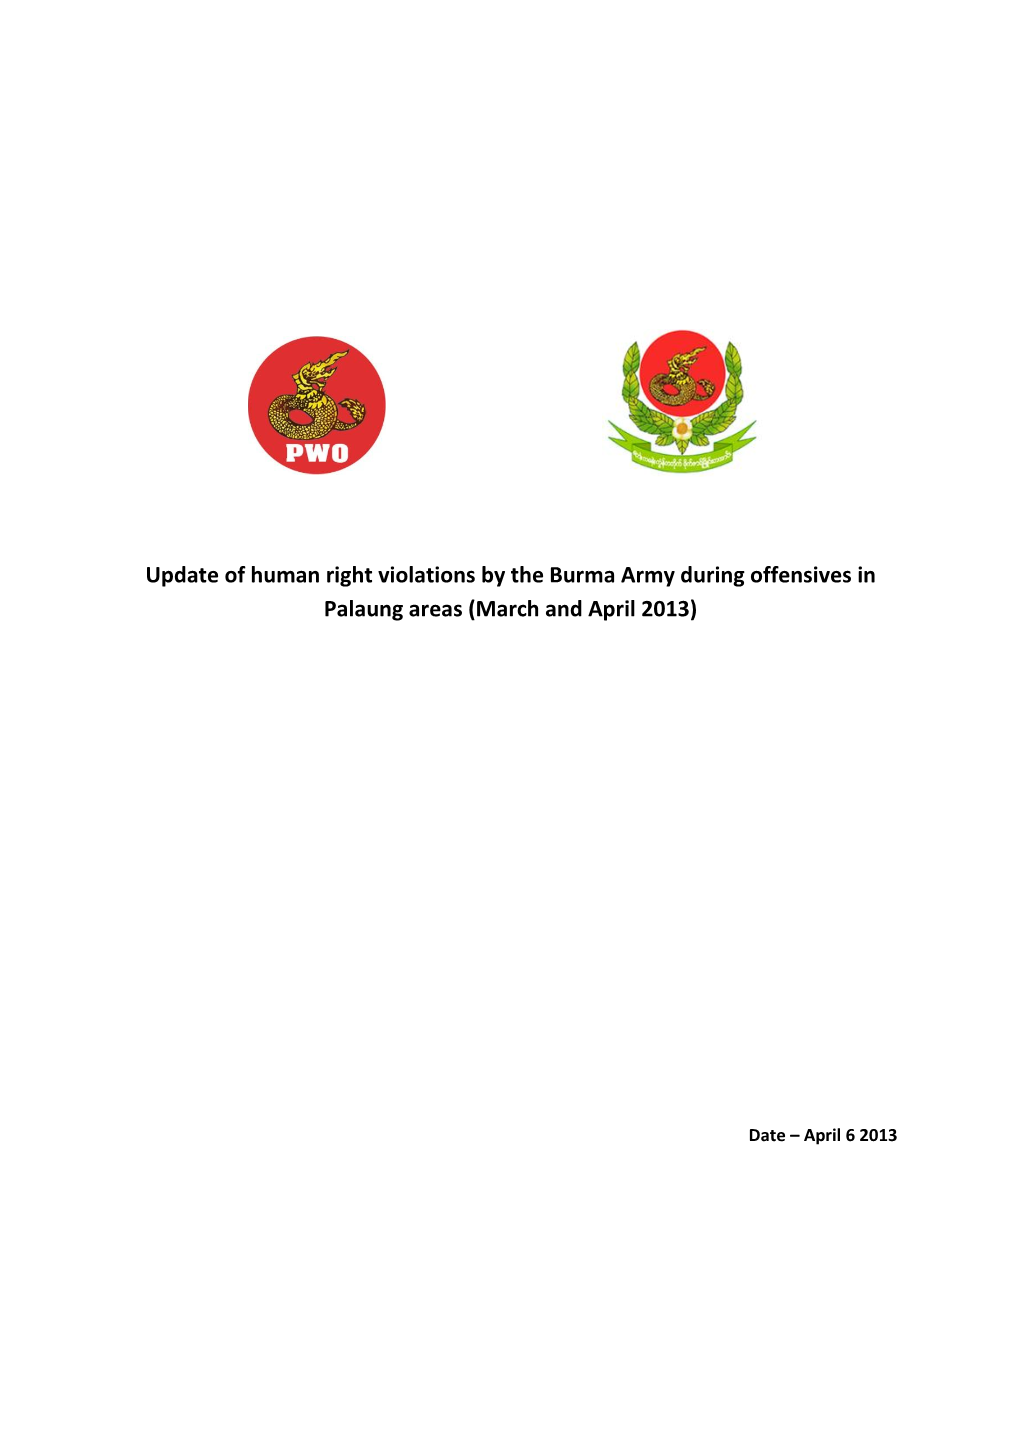 Update of Human Right Violations by the Burma Army During Offensives in Palaung Areas (March and April 2013)